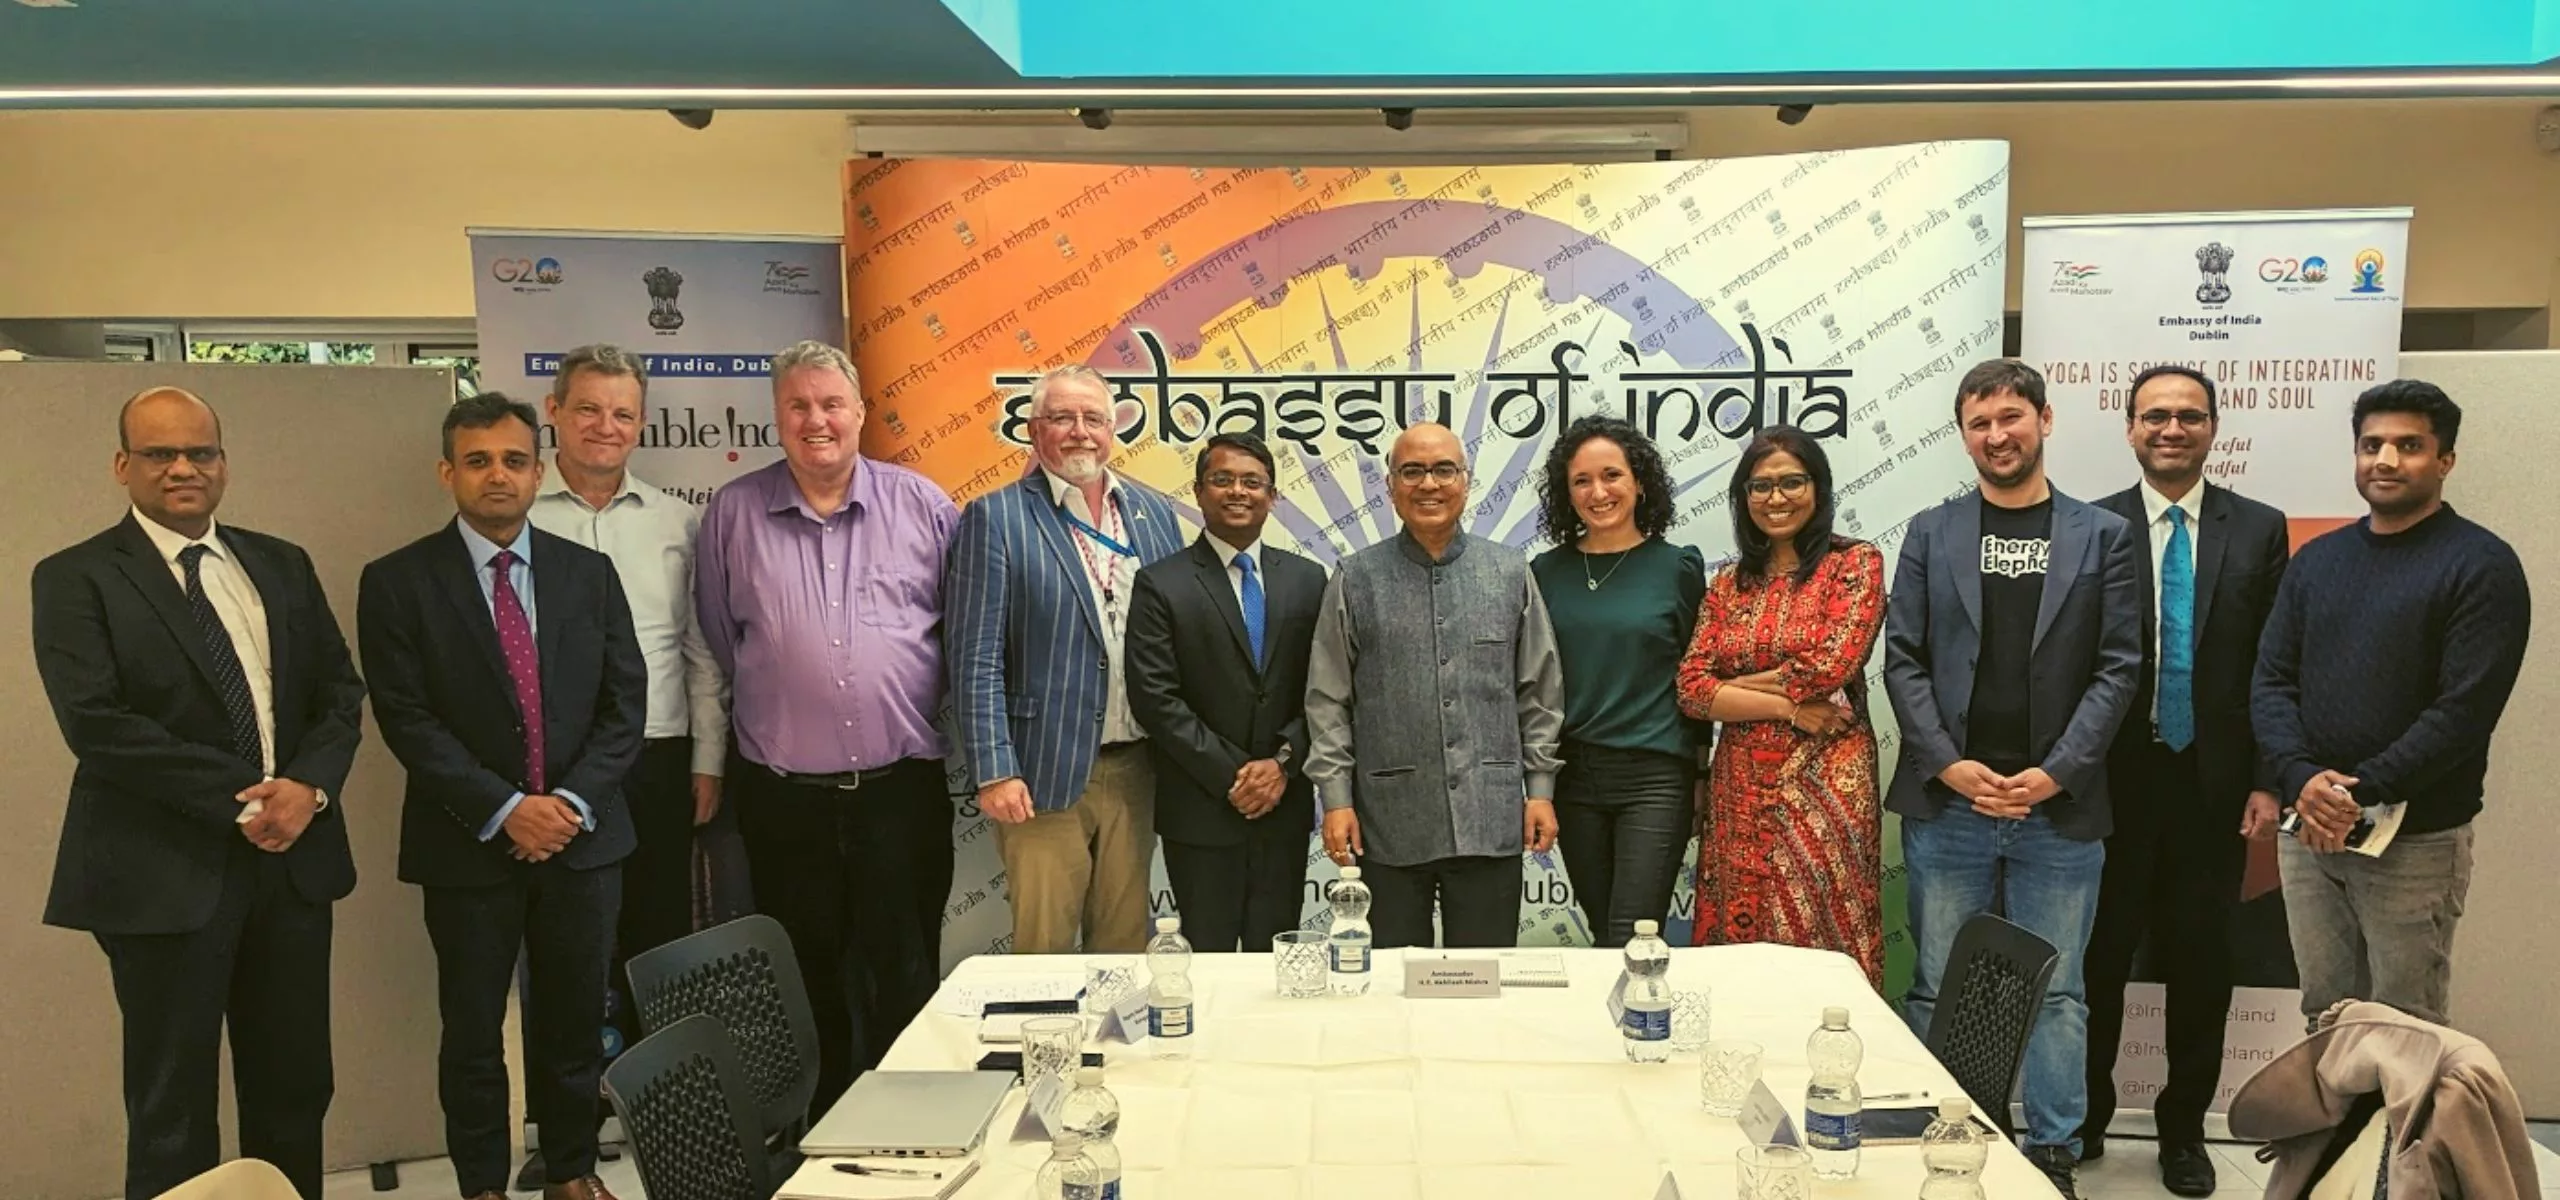 EpiSensor participates in dedicated ‘Energy Transition’ roundtable at the Embassy of India, Dublin